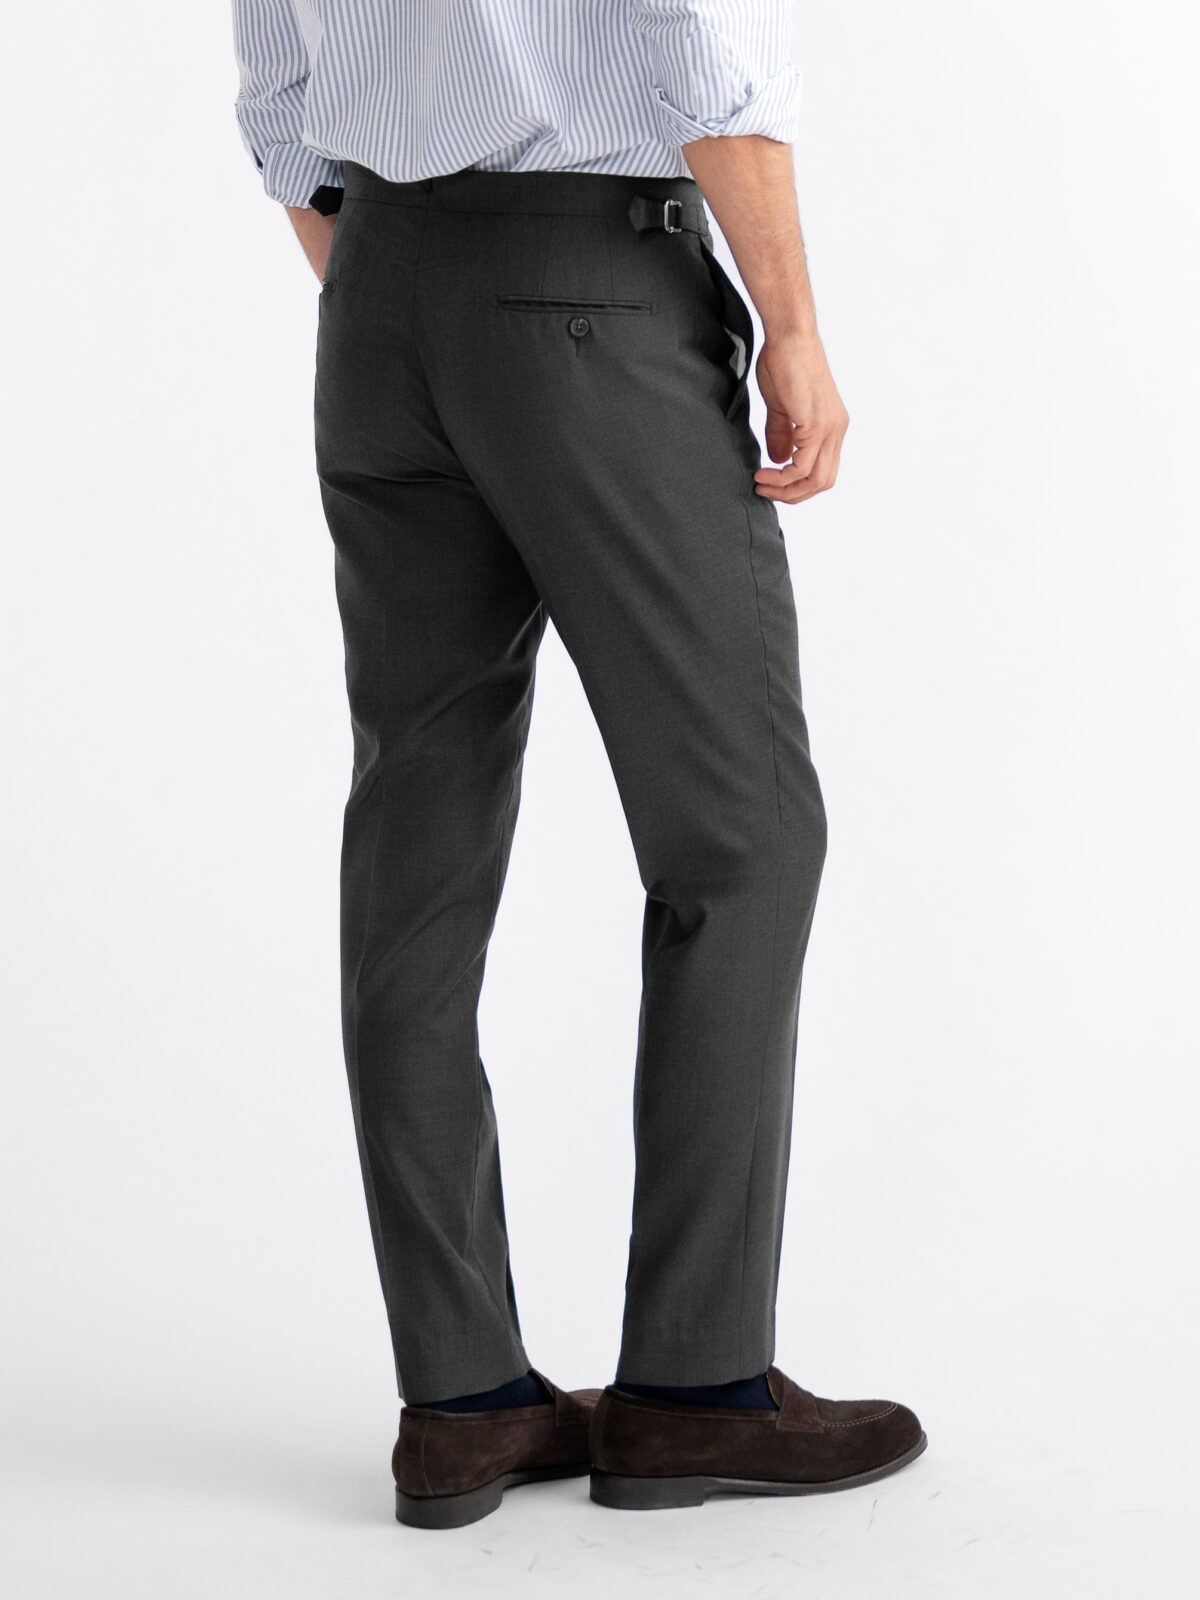 Five Mid-Grey Flannel Trousers under $150 ... | This Fits - Menswear,  Style, Sales, Reviews